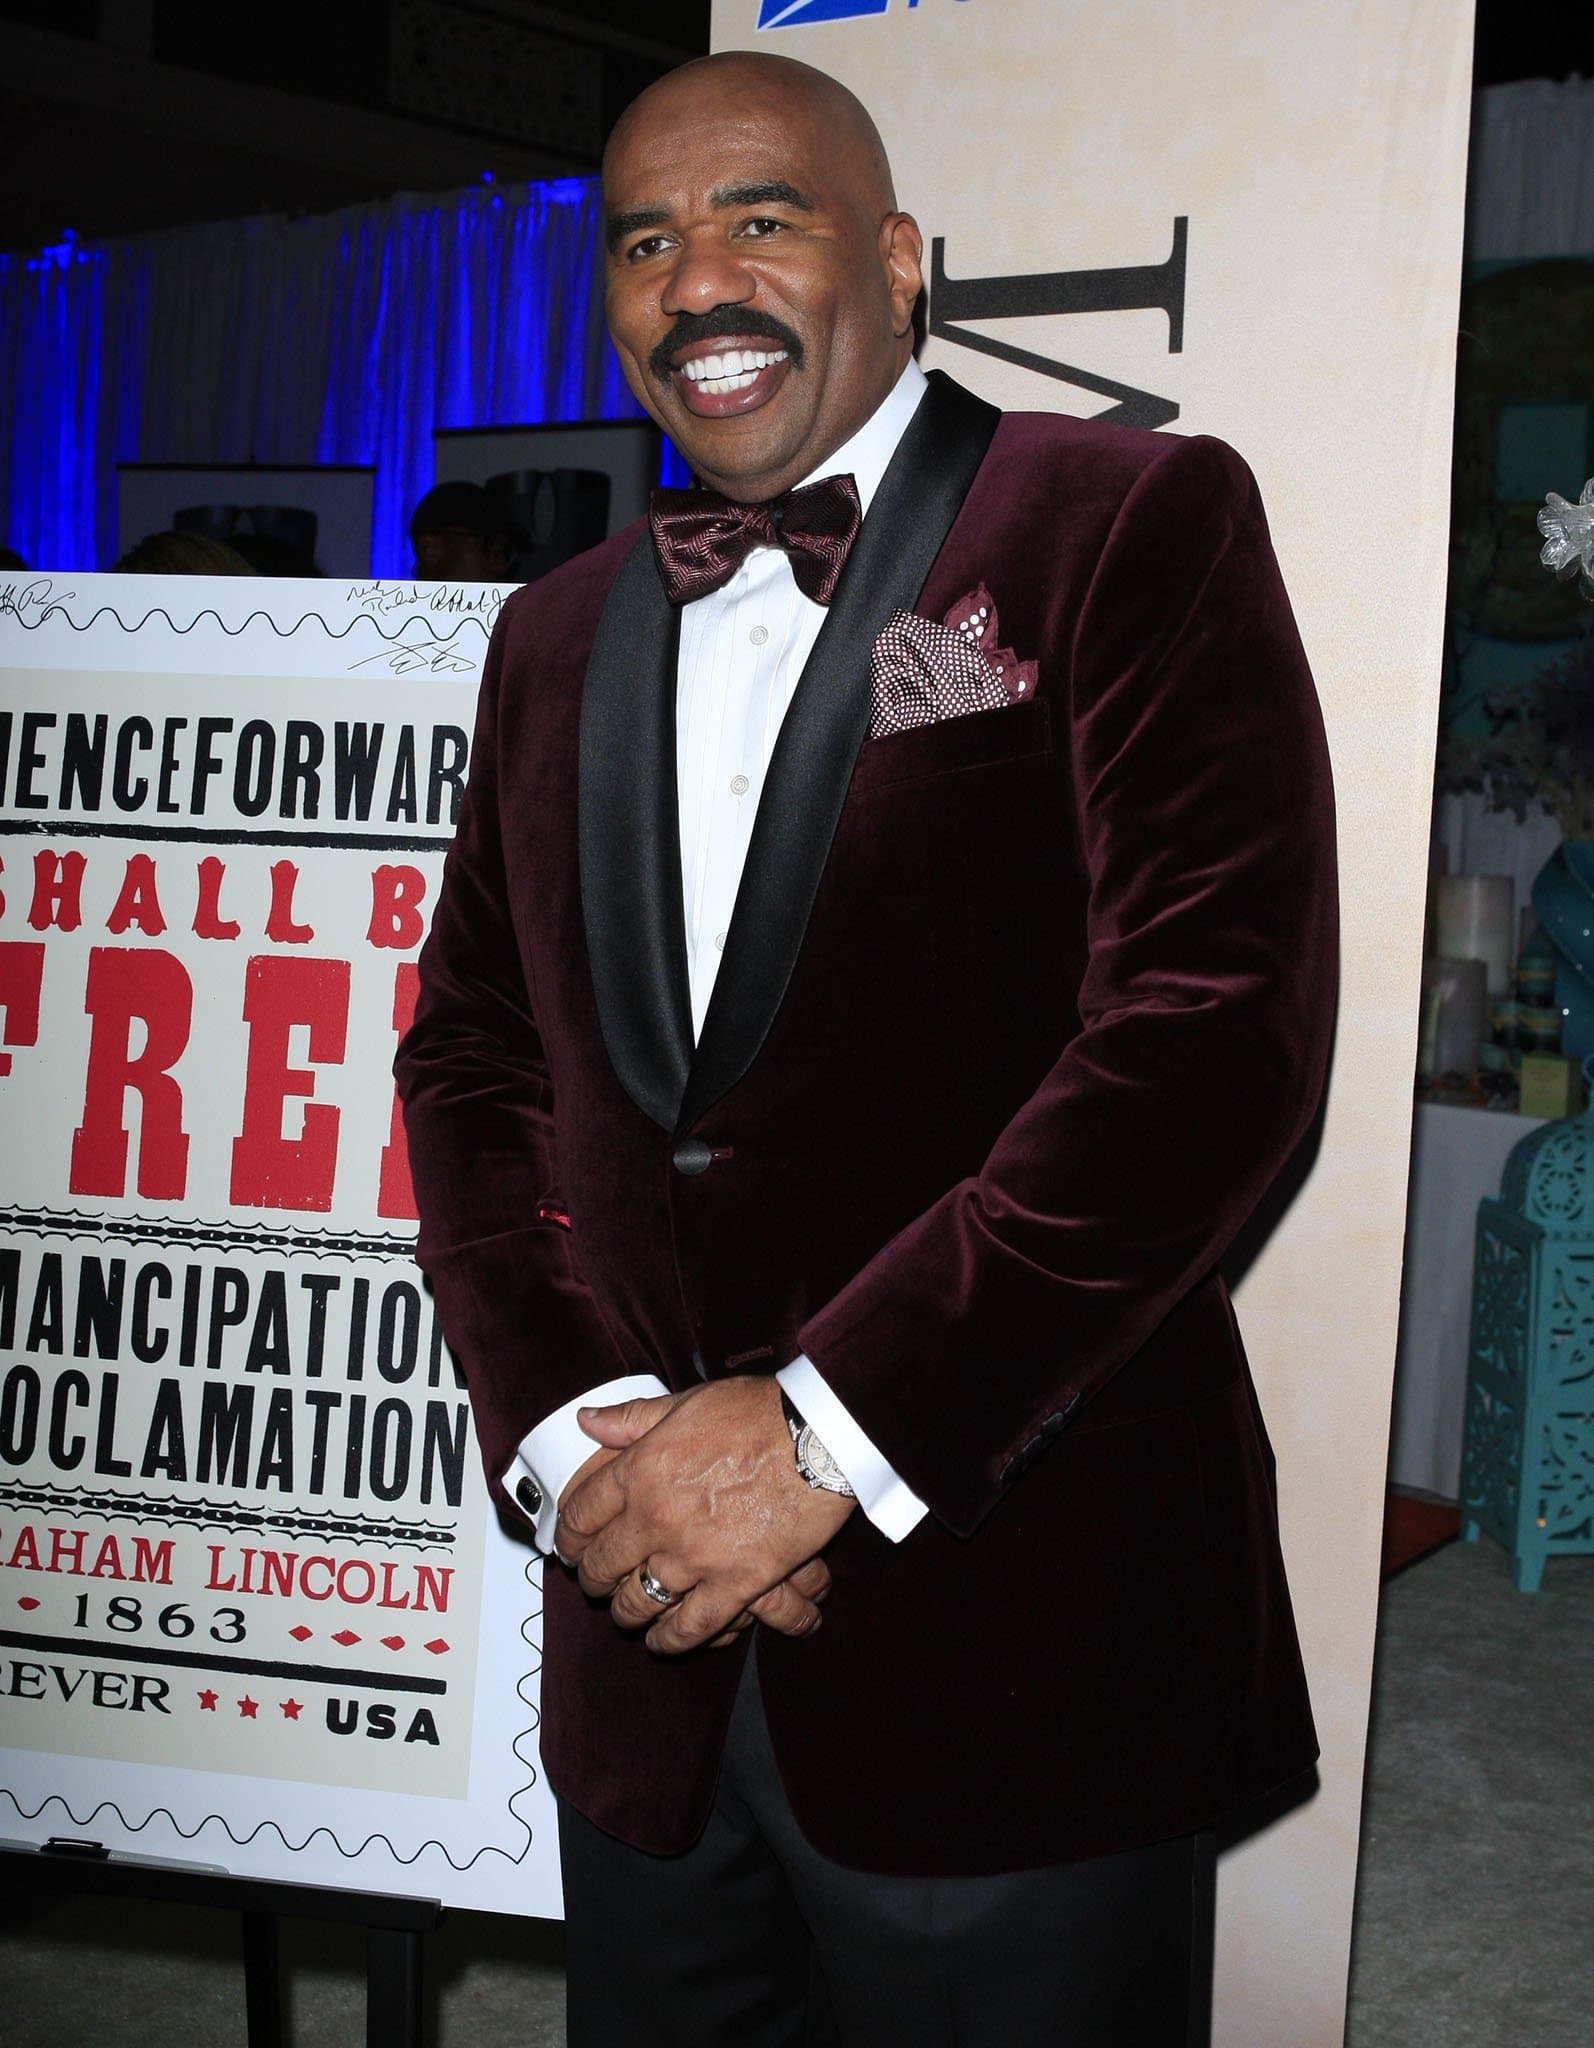 Best known for hosting Family Feud and the Miss Universe competition, former standup comedian Steve Harvey became the first double host nominated for a Daytime Emmy Award, receiving nominations for both Outstanding Talk Show Host and Outstanding Game Show Host in 2013